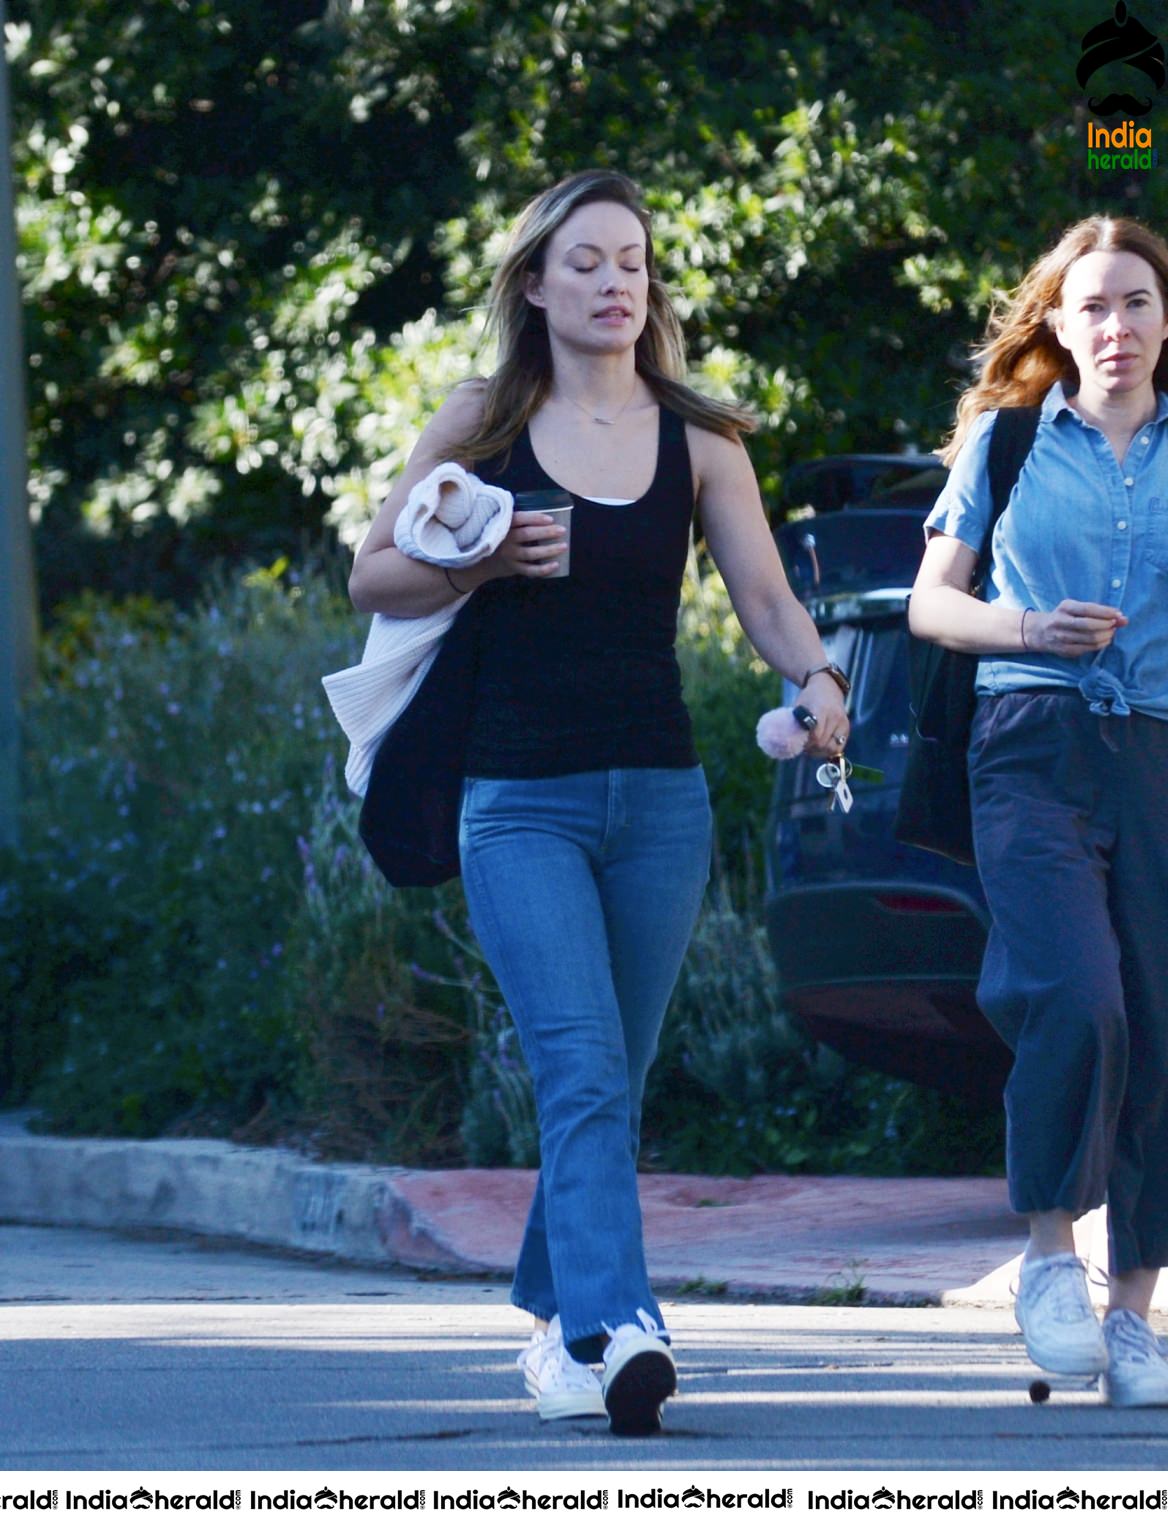 Olivia Wilde caught by Paparazzi while she was out for coffee in Los Angeles